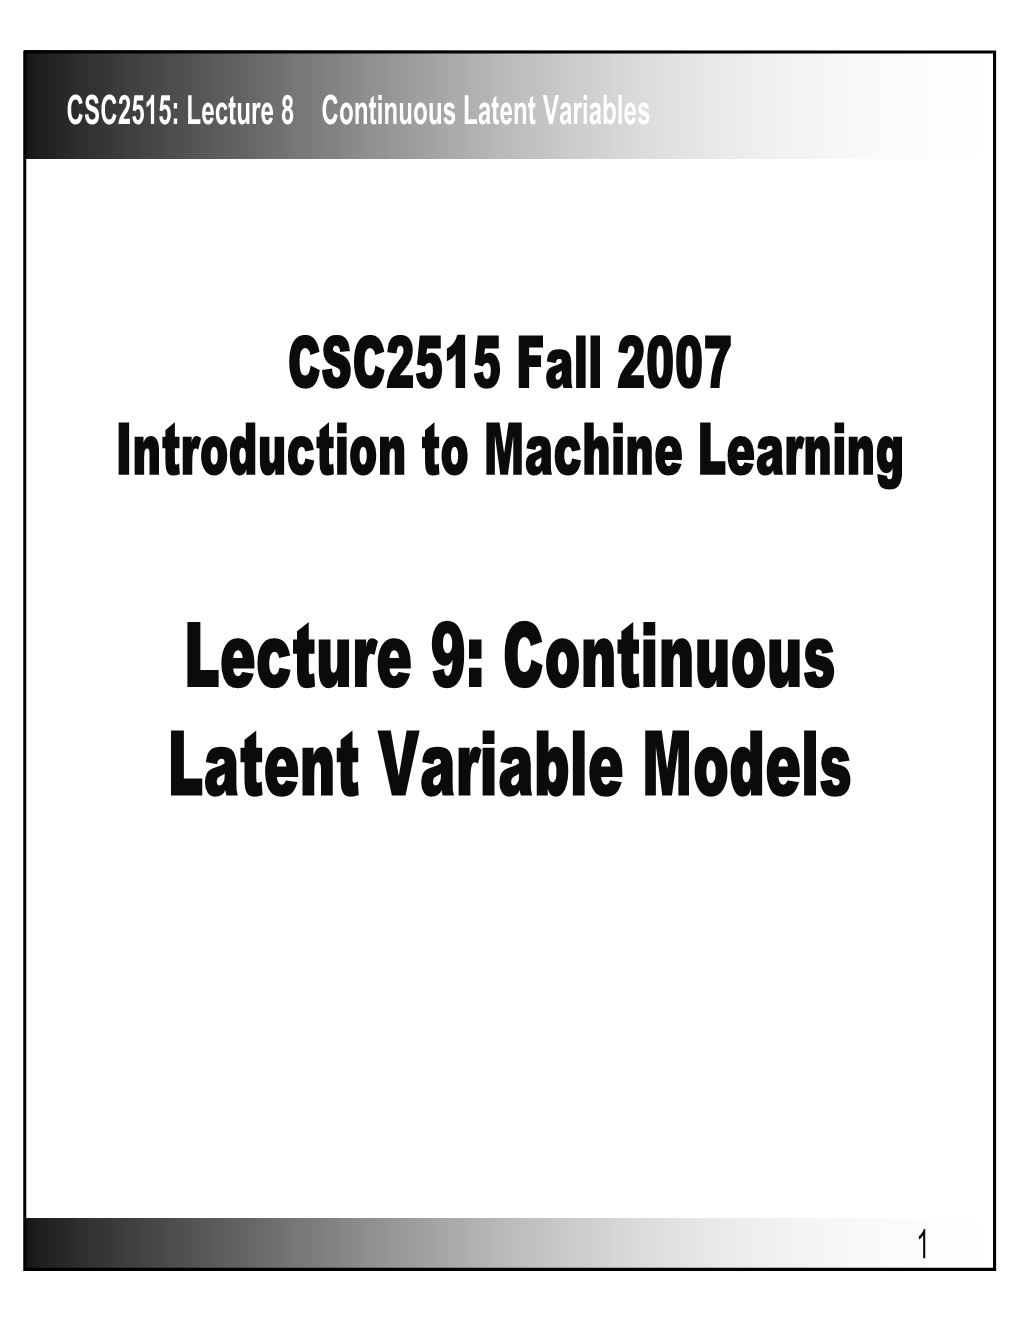 Lecture 9: Continuous Latent Variable Models